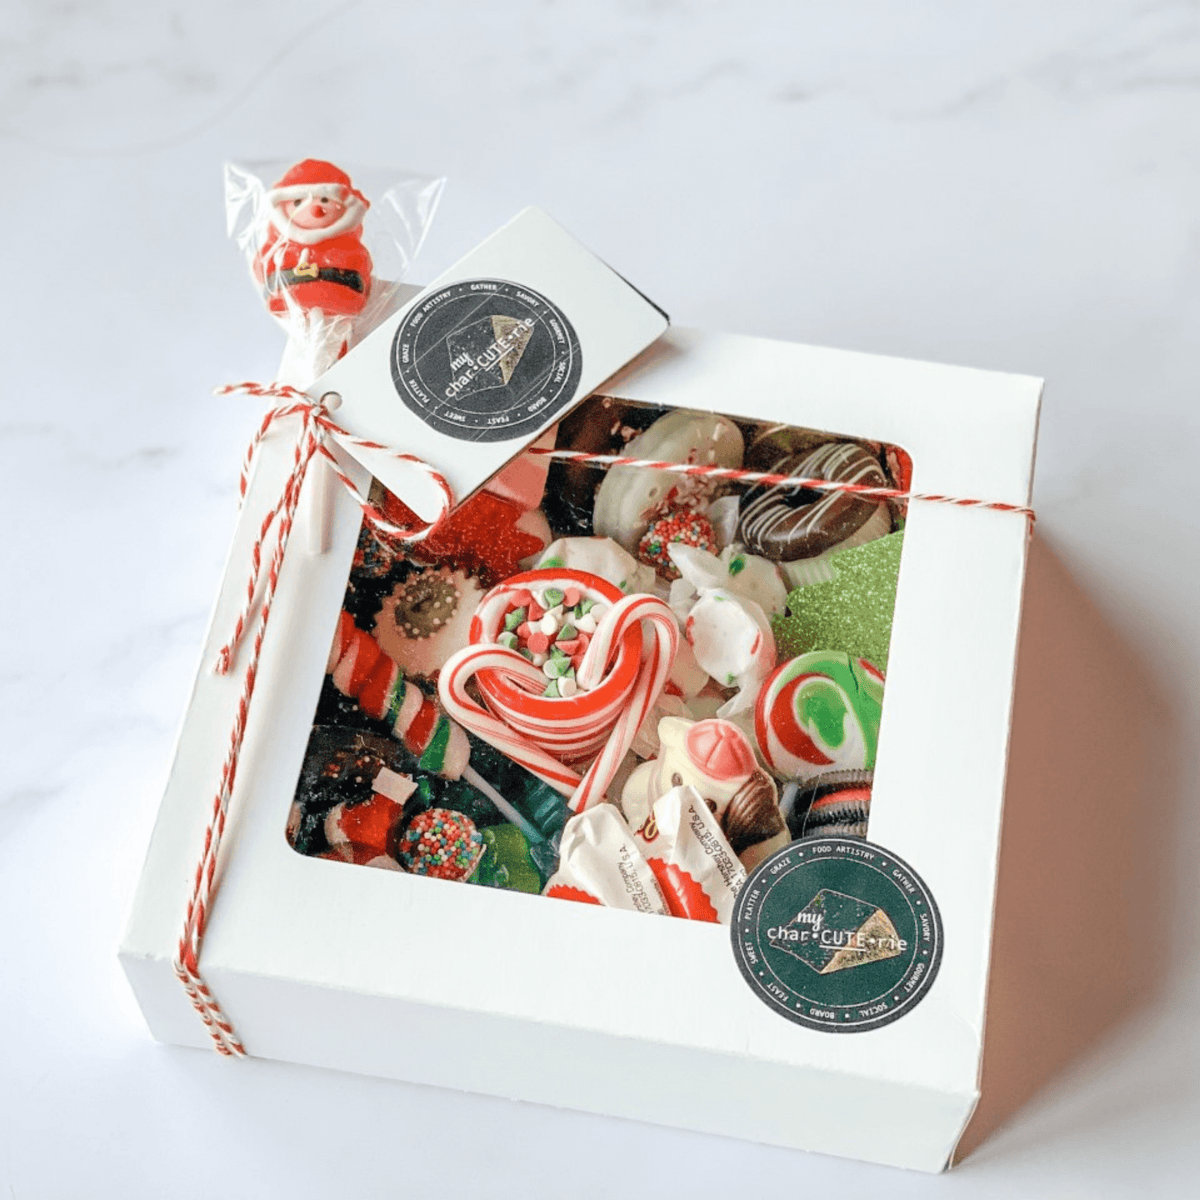 Very Merry Sweets CharCUTErie Box